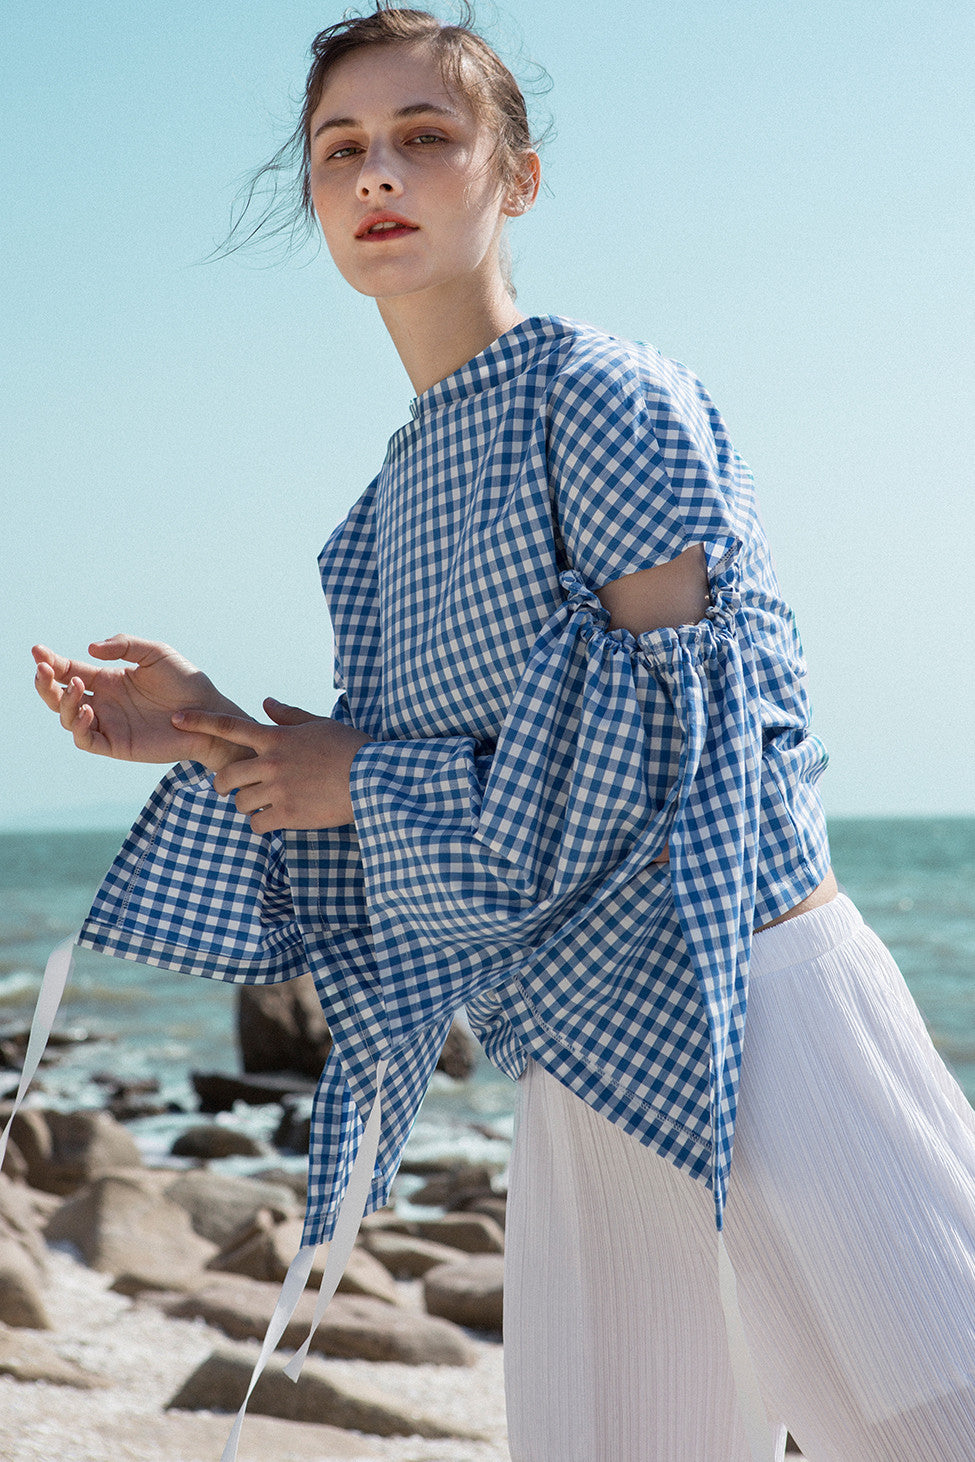 The Tabitha Top in blue gingham stripes featuring boat neckline, open-back with drawstring tape back tie. Gathered long wide sleeves. 